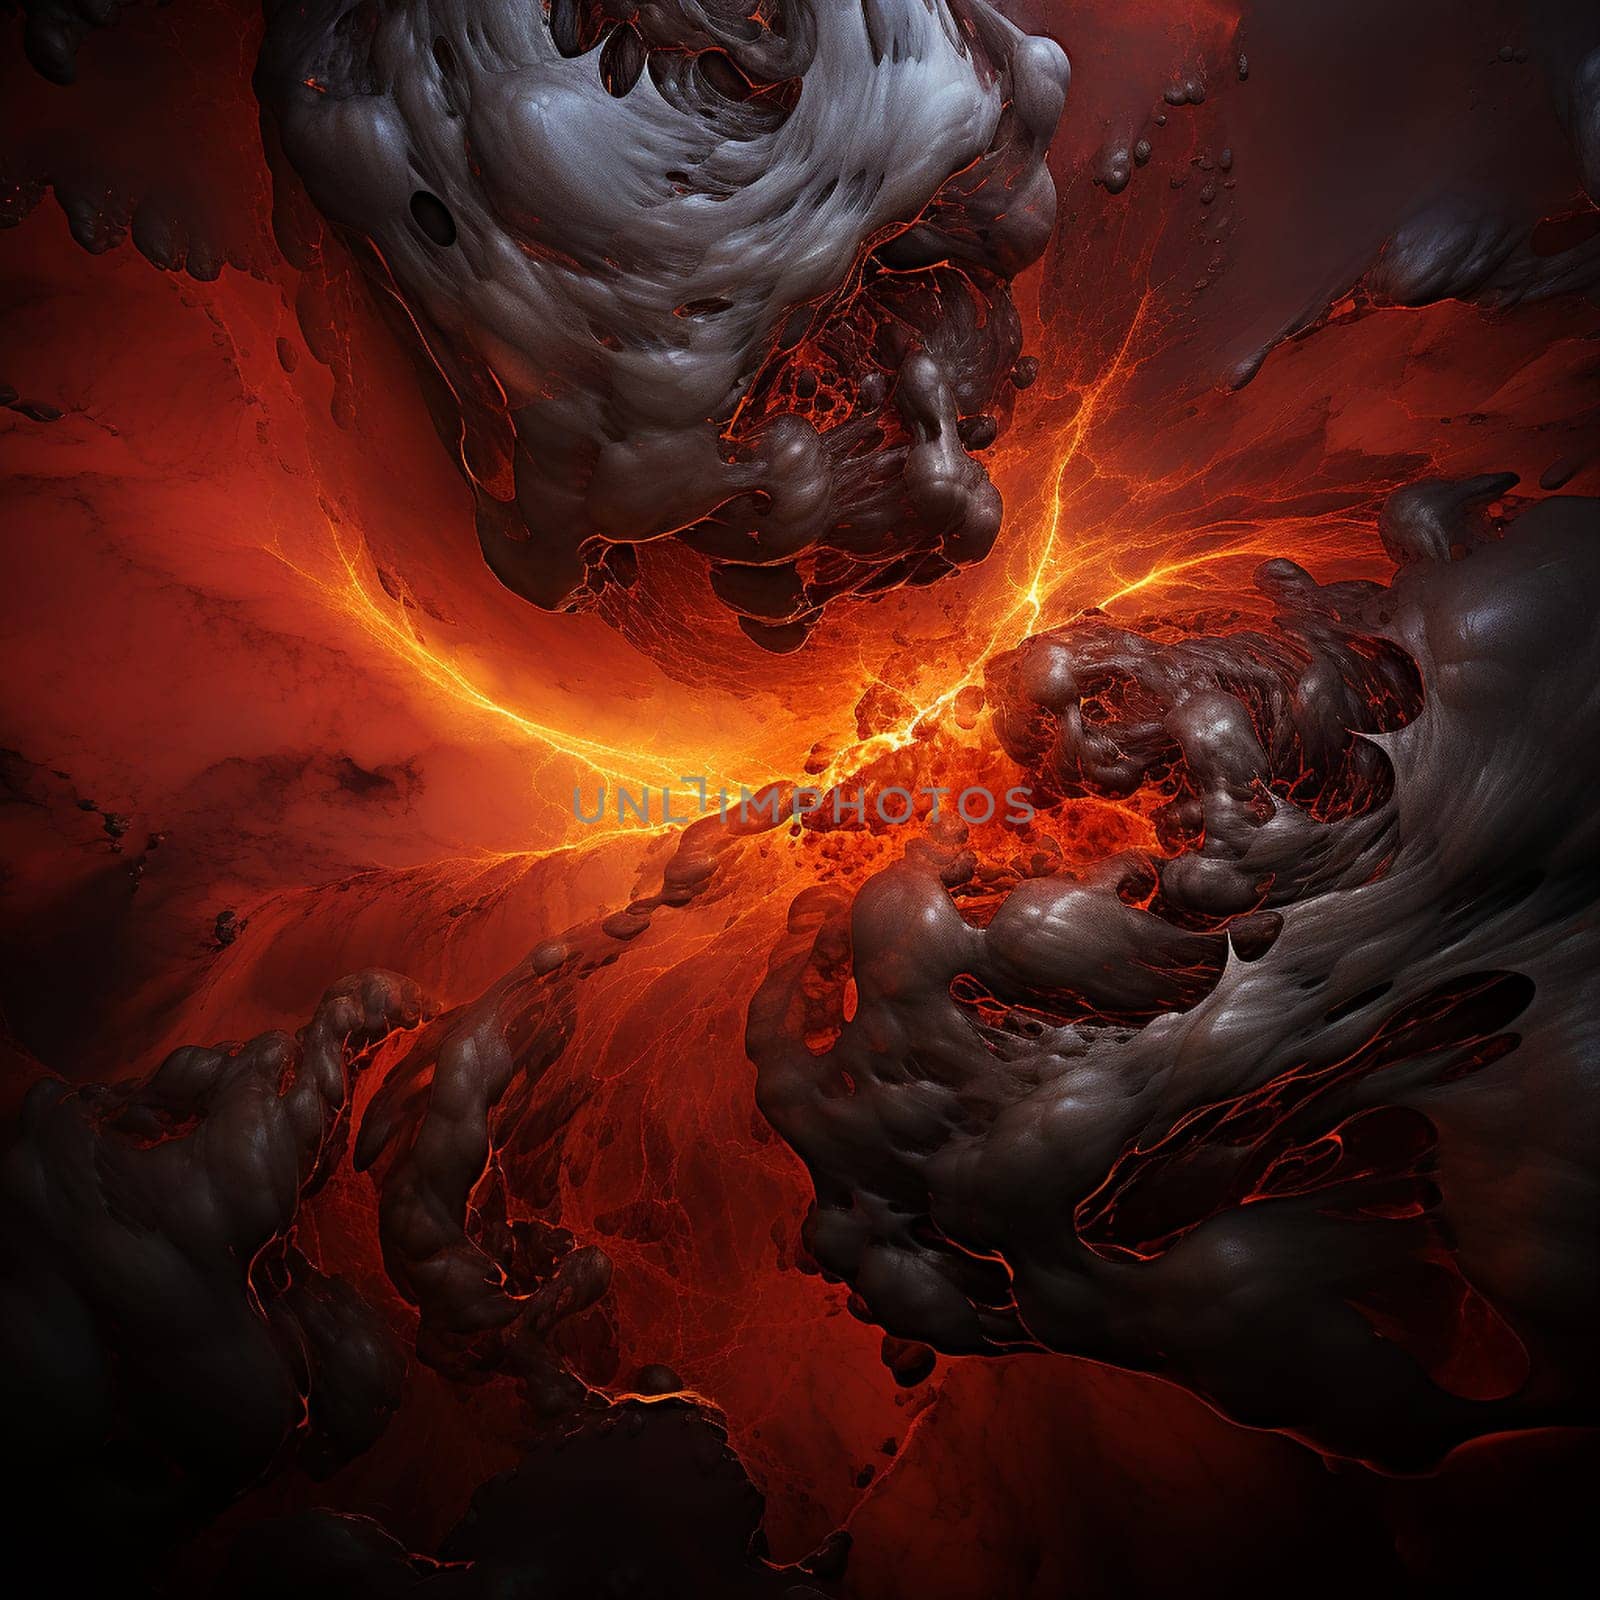 Witness the mesmerizing power of a volcanic eruption in this abstract art depiction titled 'Infernal Surge'. Vibrant tendrils of molten lava shoot up from the volcanic crater, illuminating the night sky with fiery hues. The eruption showcases a mix of awe-inspiring beauty and raw, destructive power, as rocks and ash are propelled into the atmosphere. Lava cascades down the mountainside, engulfing everything in its path, leaving a trail of destruction. This captivating image captures the intense contrast between the fiery red-hot lava and the dark, ominous background, creating a visual spectacle that demands attention. 'Infernal Surge' is perfect for microstock sites in search of dynamic and eye-catching imagery.